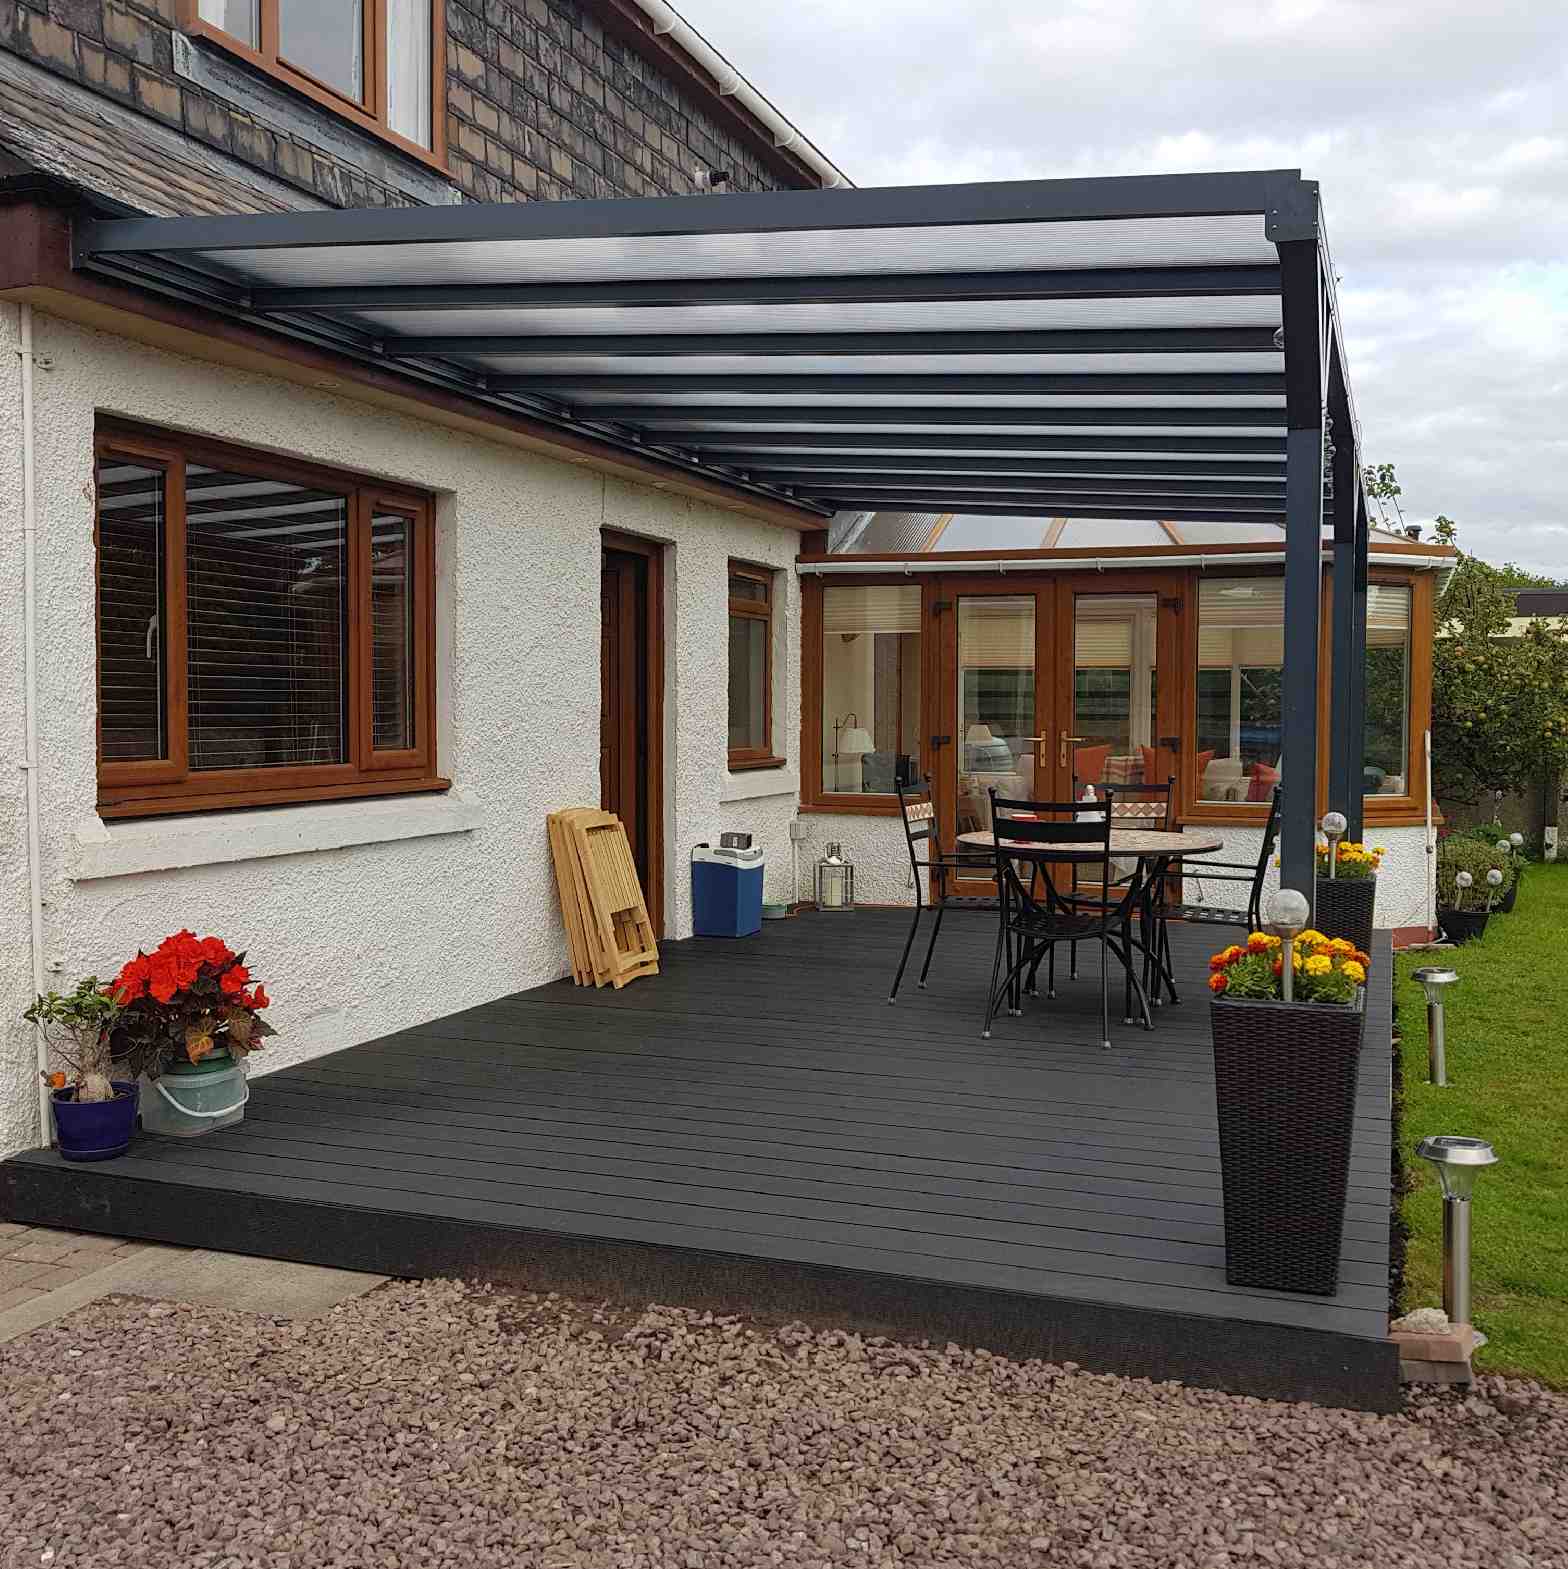 Buy Omega Verandah, Anthracite Grey, 16mm Polycarbonate Glazing - 11.6m (W) x 2.5m (P), (5) Supporting Posts online today